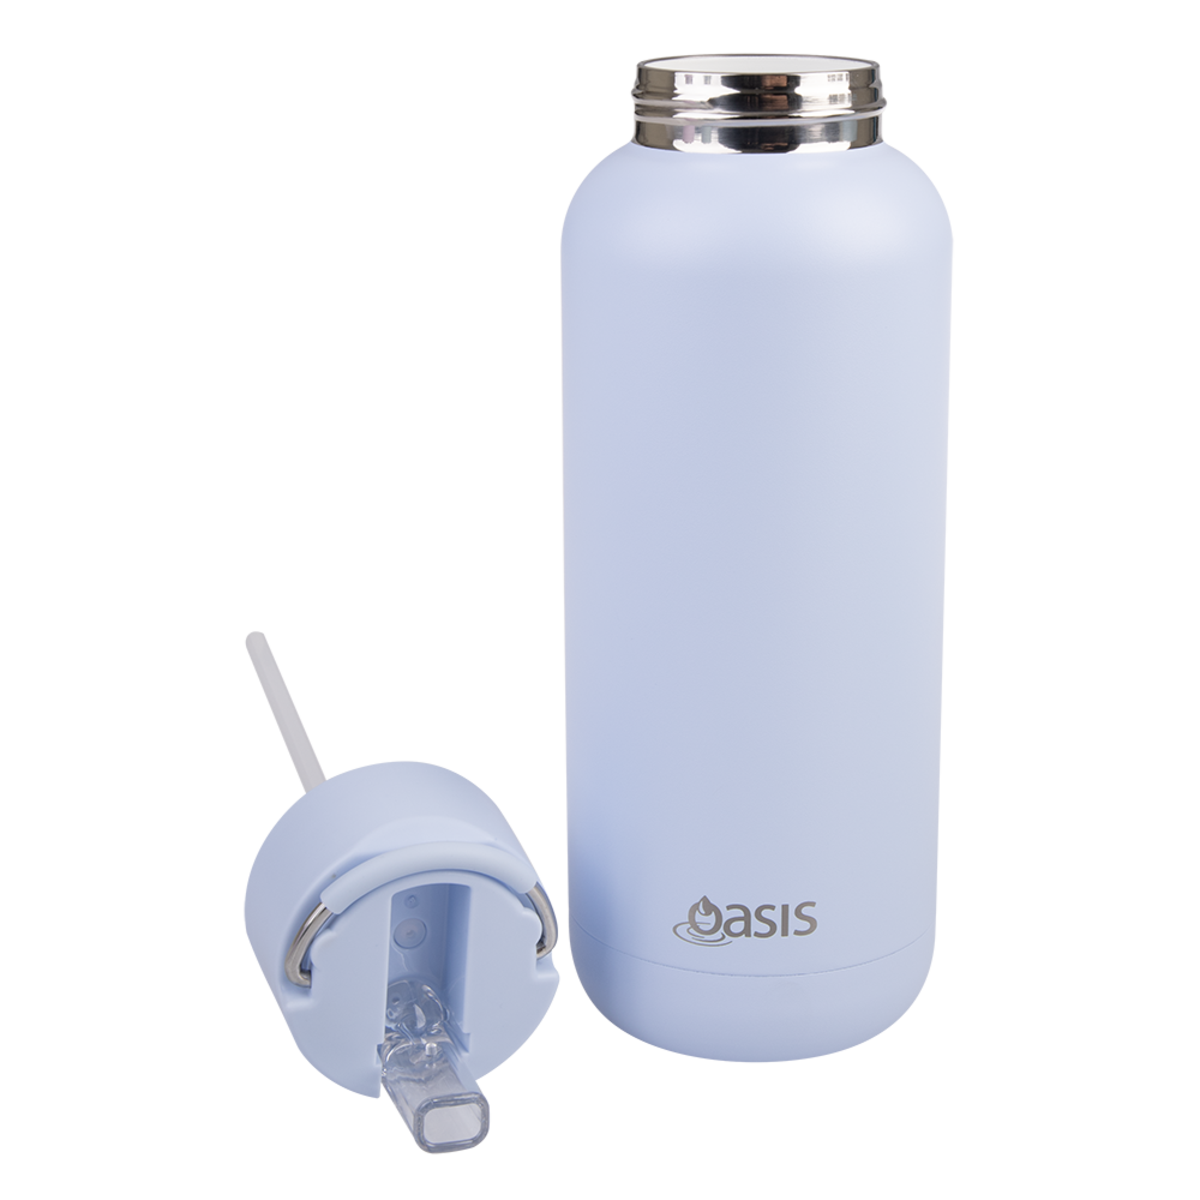 Oasis "moda" Ceramic Lined S/s Triple Wall Insulated Drink Bottle 1l - Periwinkle